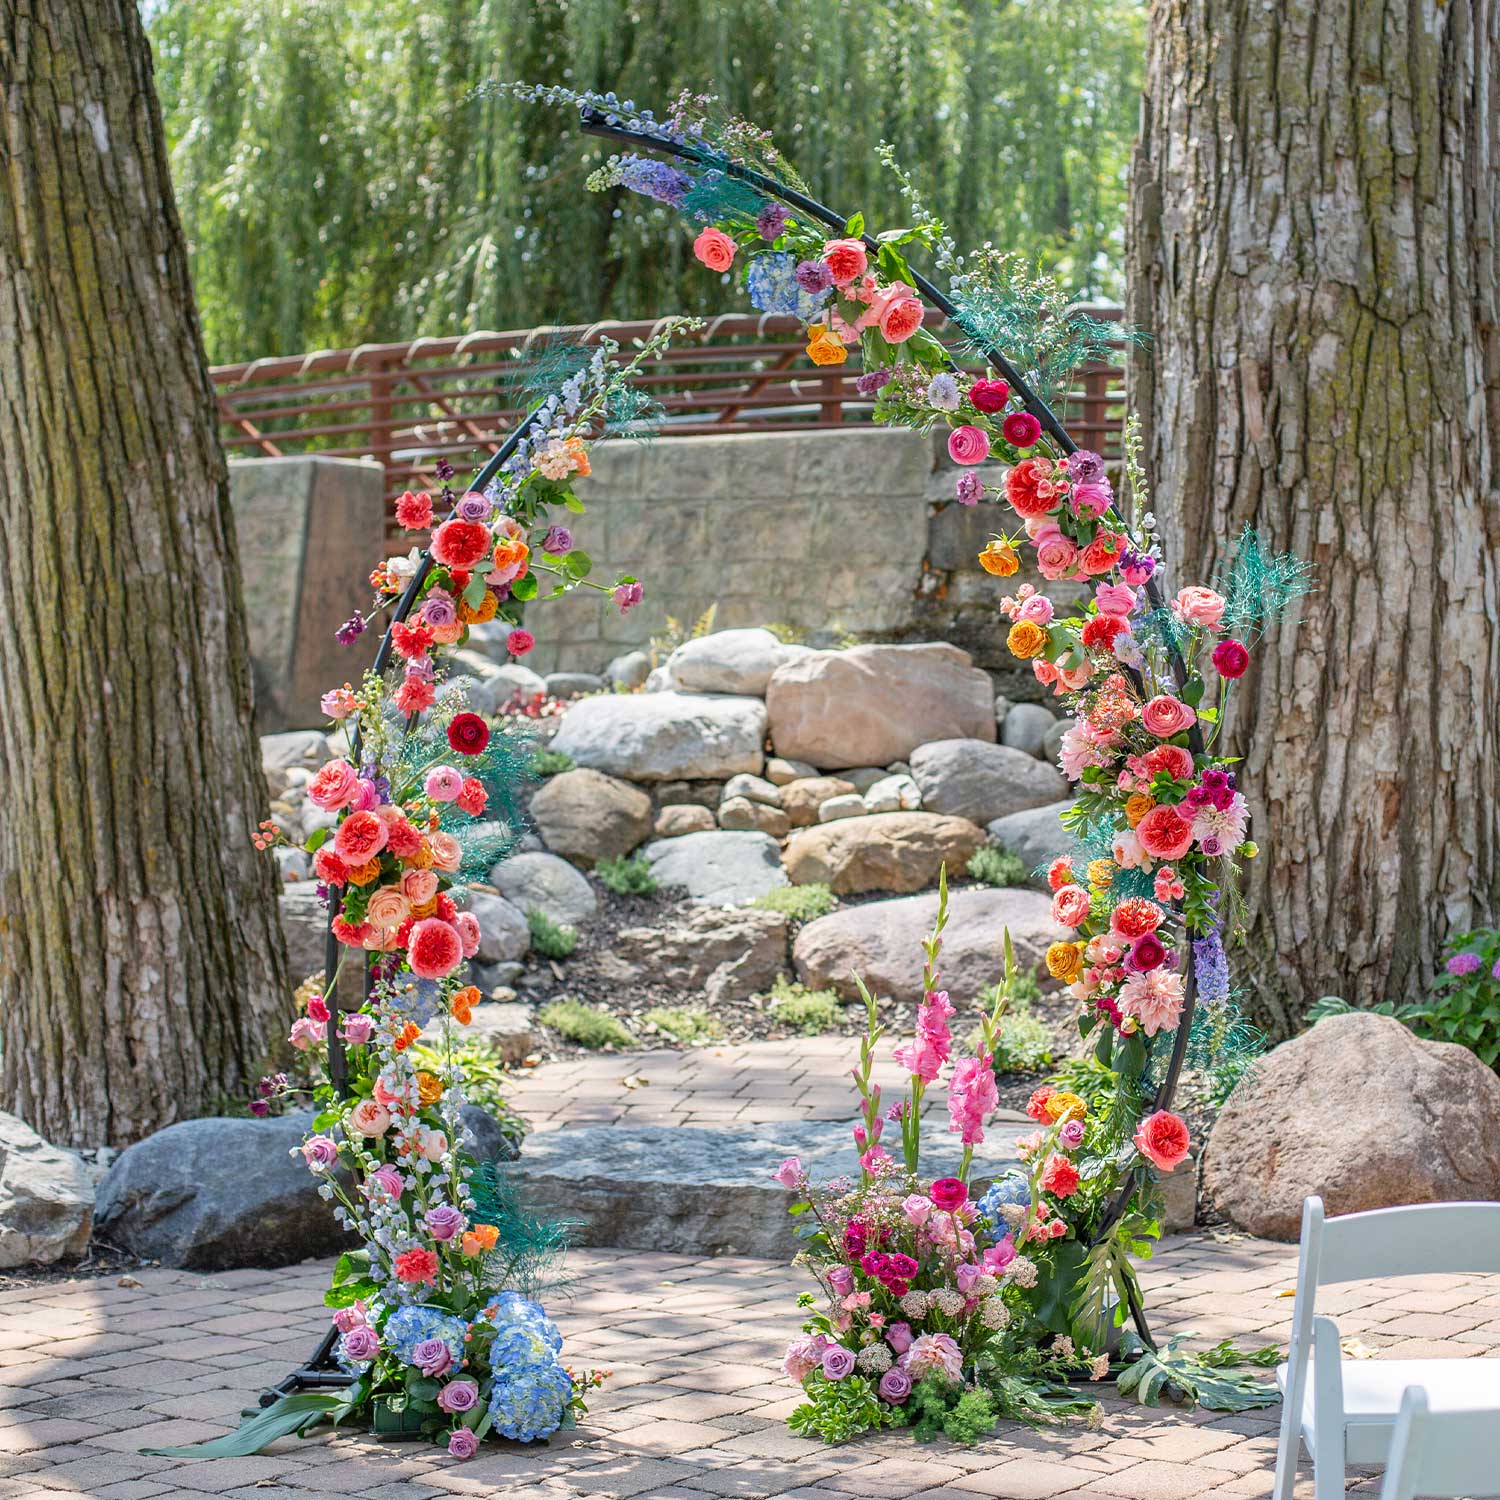 A half round 46 & Spruce floral arch adorned with colorful flowers stands at a pathway entrance, set against a natural backdrop with trees, a fence, and rocks.